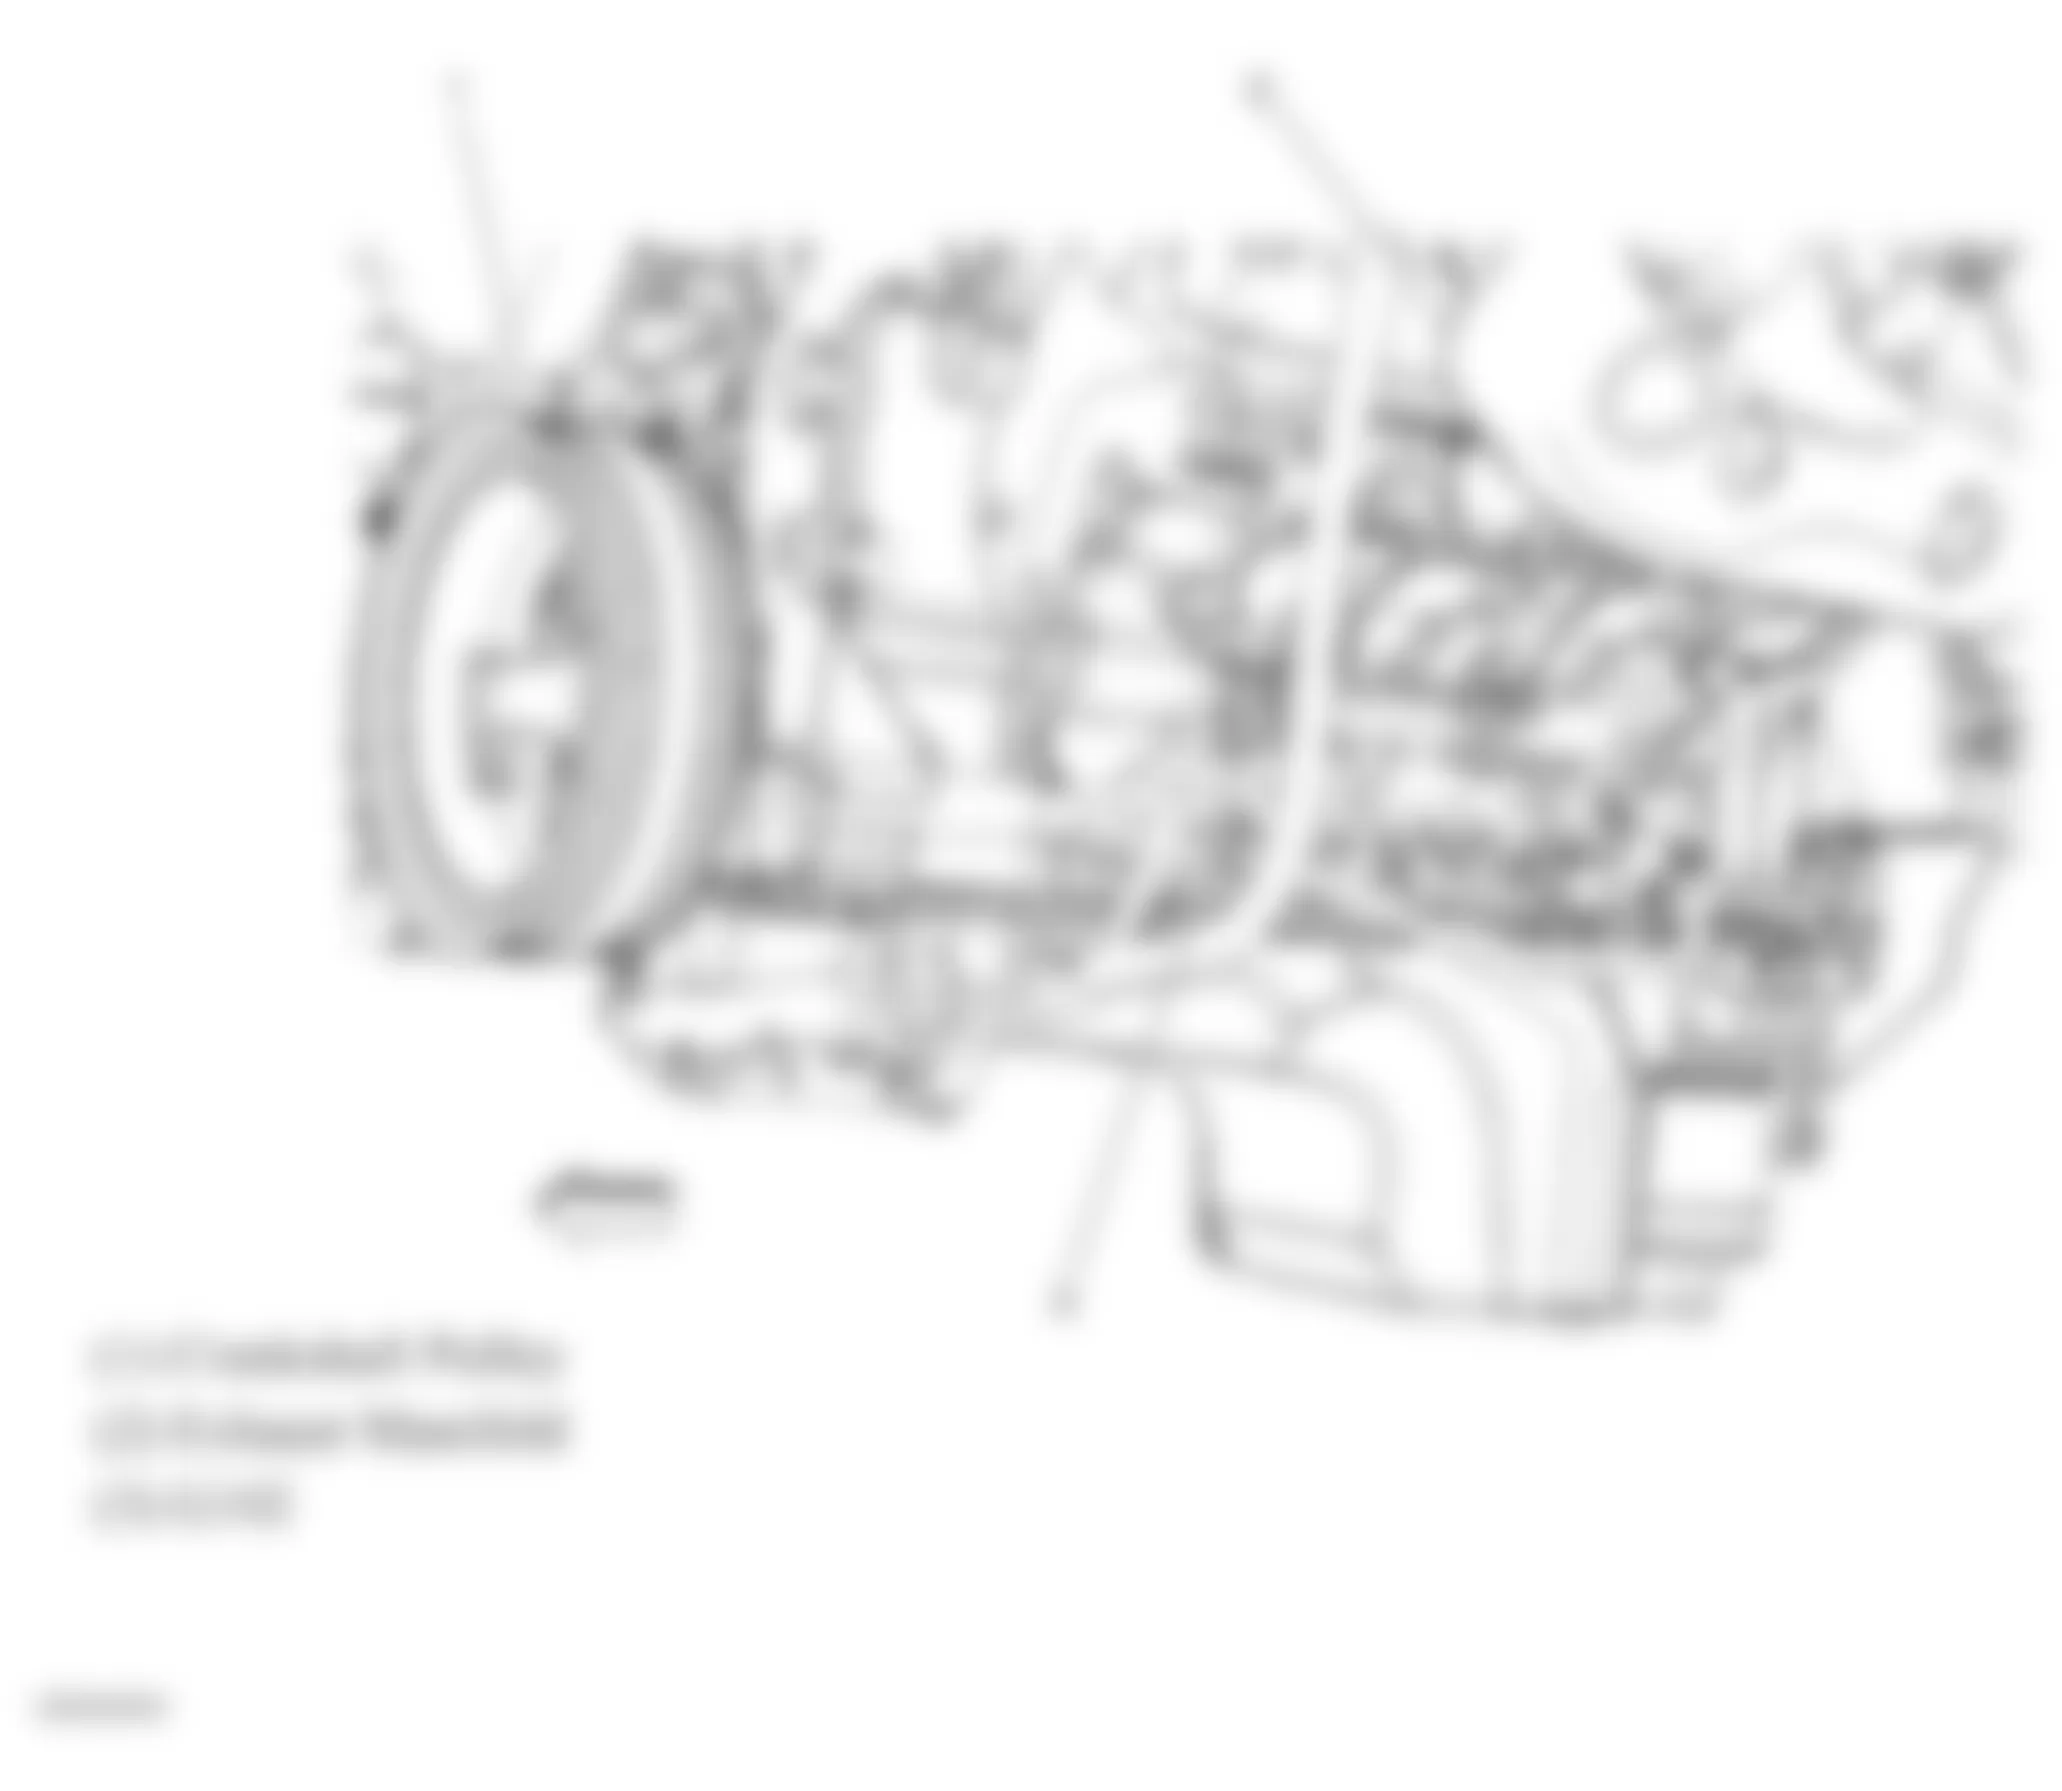 Chevrolet Silverado 3500 HD 2009 - Component Locations -  Lower Front Of Engine